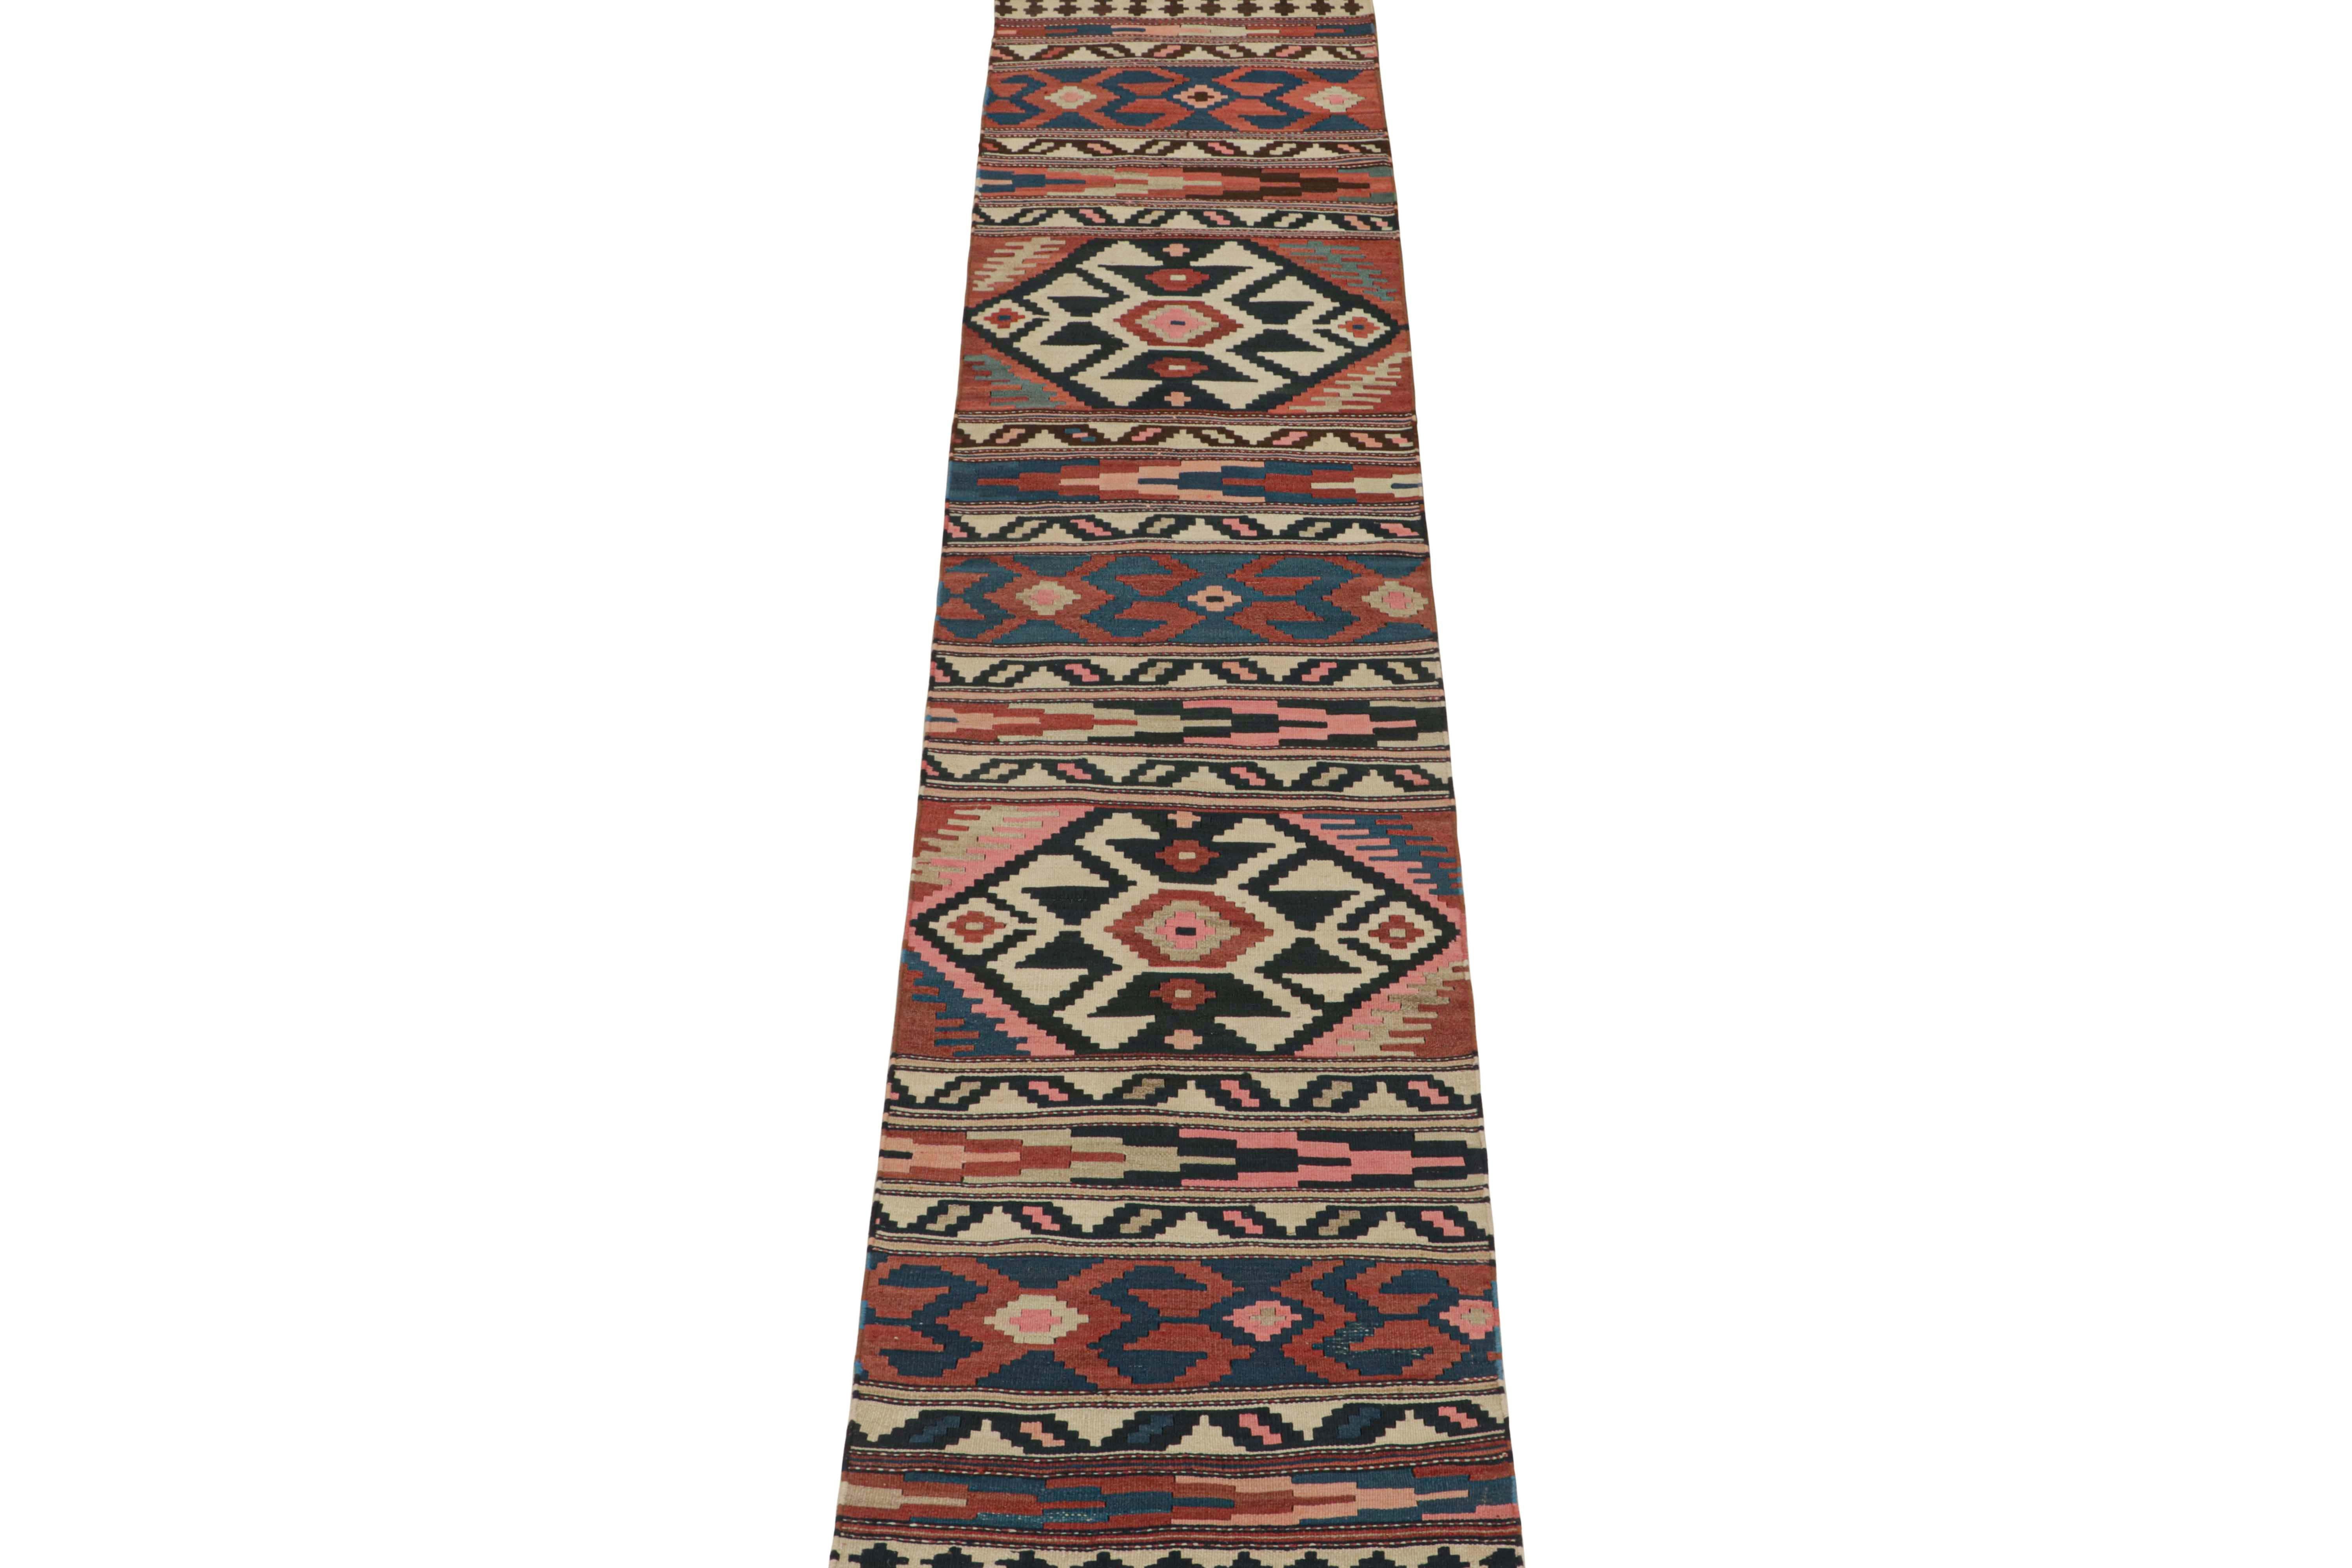 This vintage 3x12 Persian kilim is believed to be a Shahsavan runner of mid-century design—handwoven in wool circa 1950-1960.

This design favors navy blue, black, off-white and red geometric patterns, but keen eyes will further admire bright pink